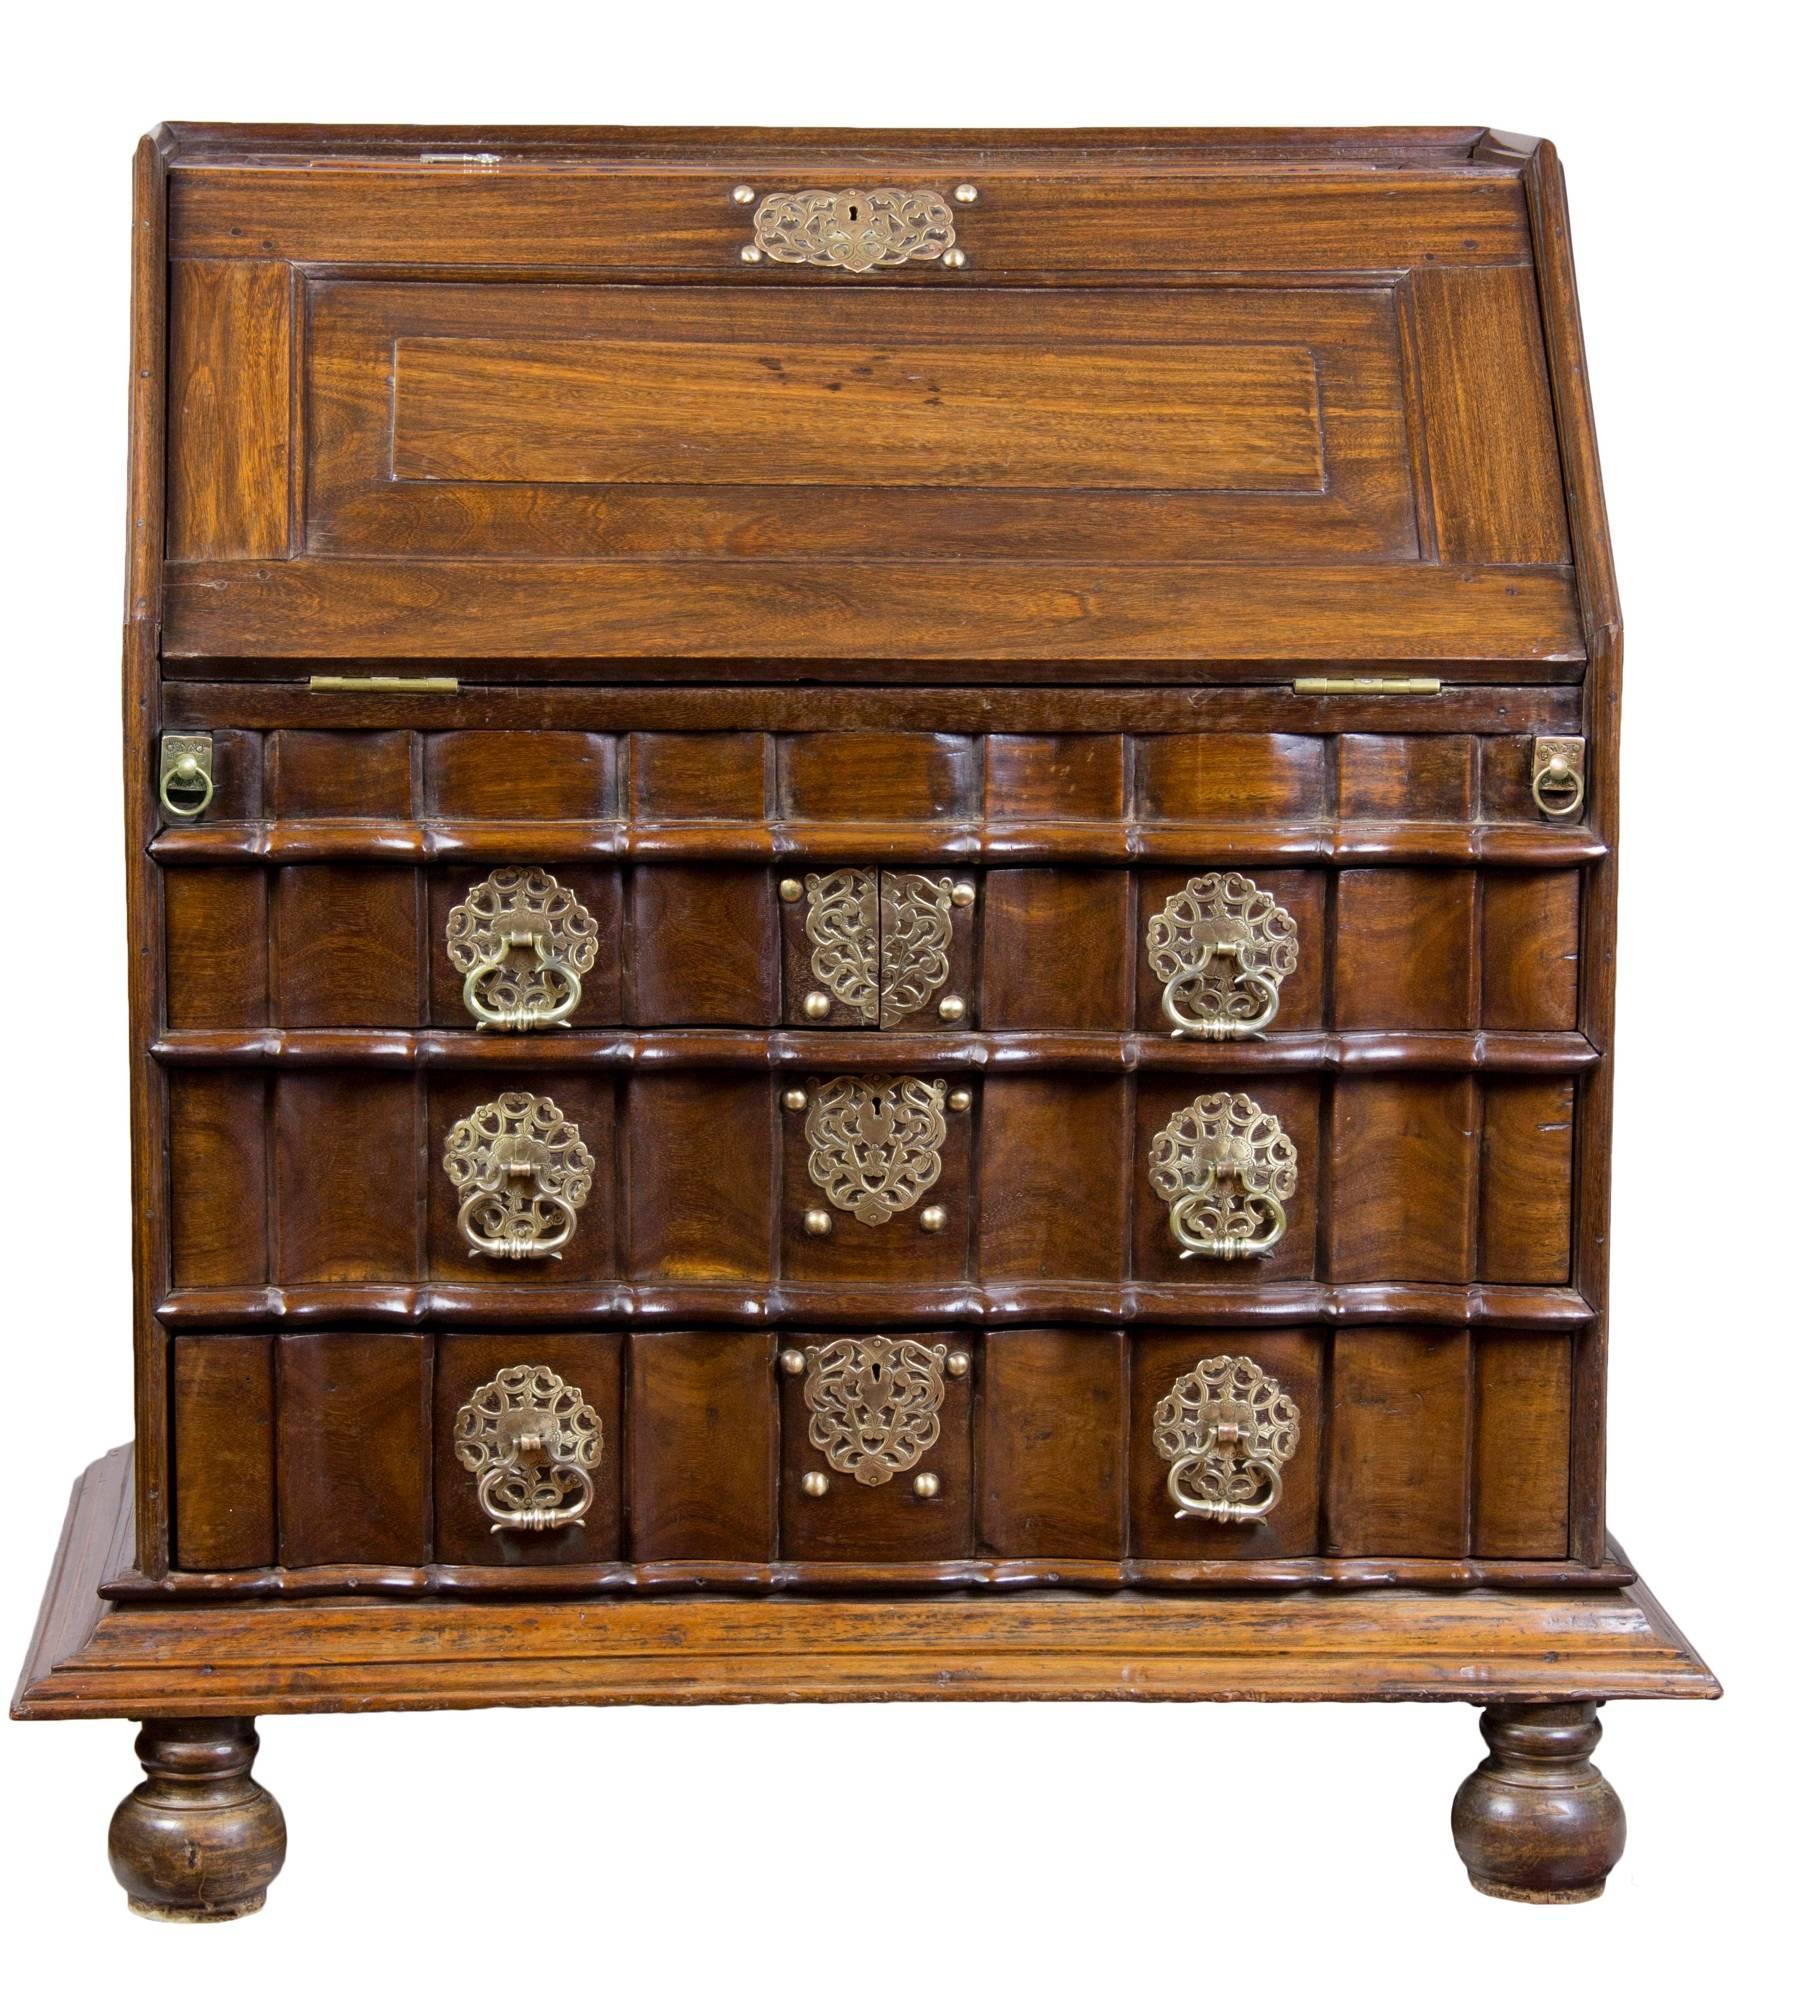 This desk is a tour de force and meant to last forever, circa 1730-1740. It retains its original 18th century bun feet and intricate hardware. All the sides are paneled and the interior is a fully developed amphitheater form, making it the most